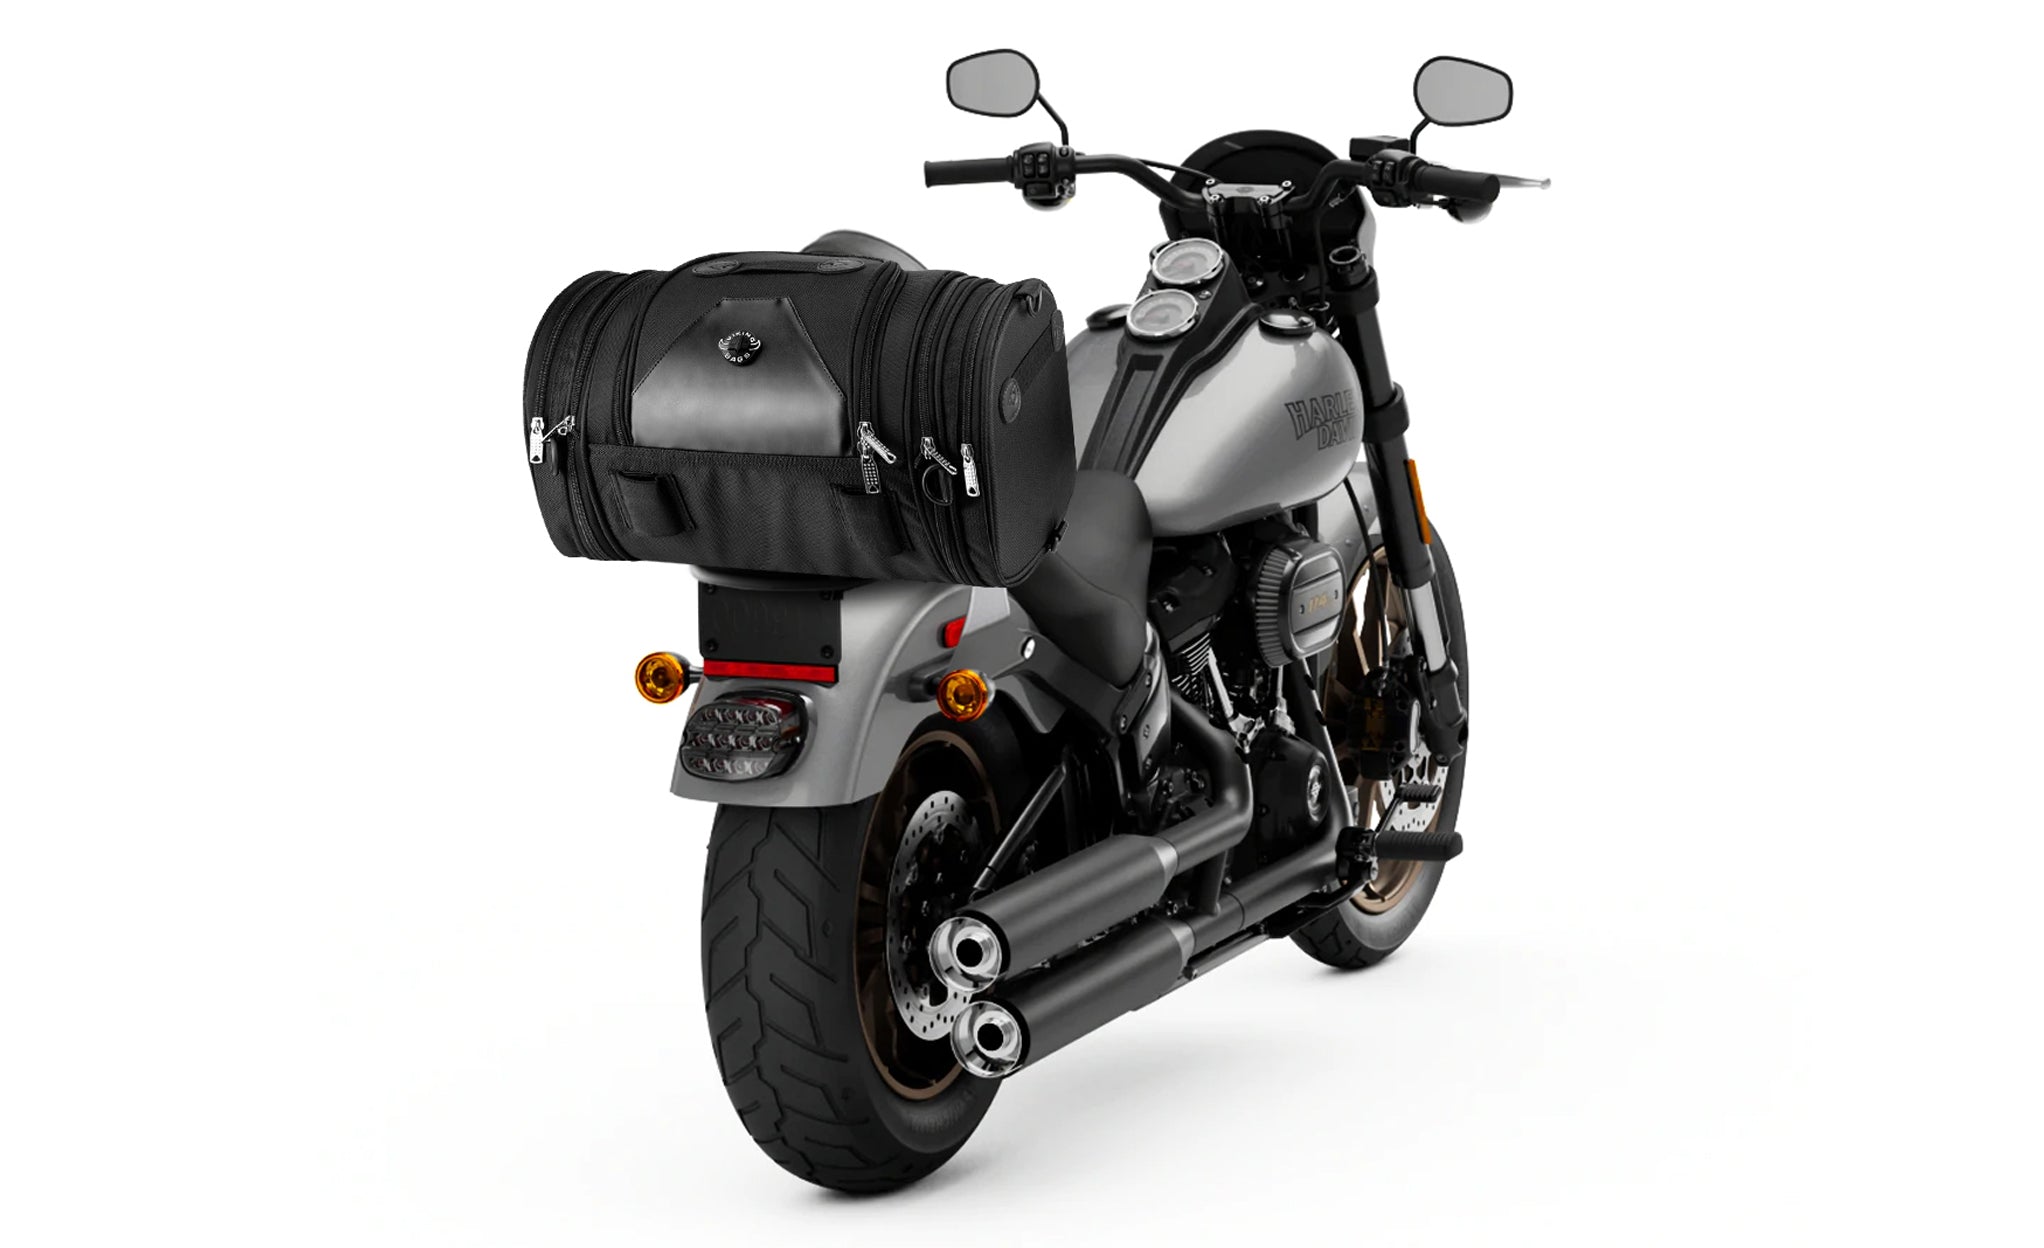 Viking Axwell Small Hysoung Motorcycle Sissy Bar Bag Bag on Bike View @expand